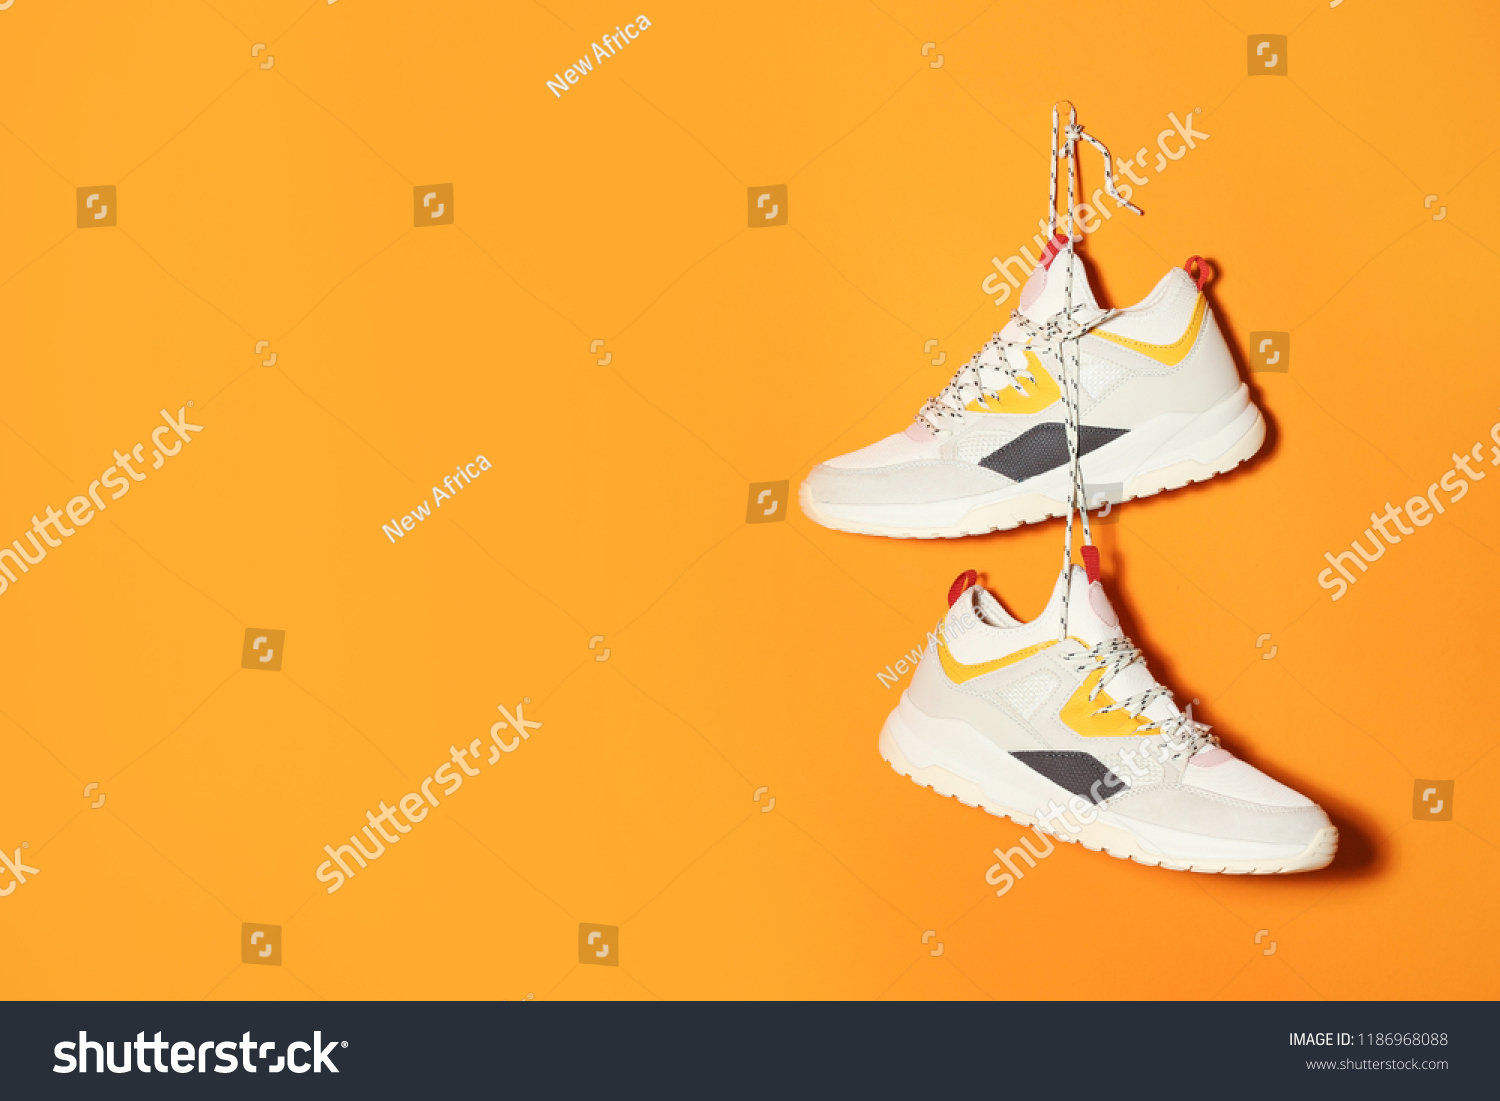 Pair of stylish sneakers hanging on color wall, space for text #1186968088